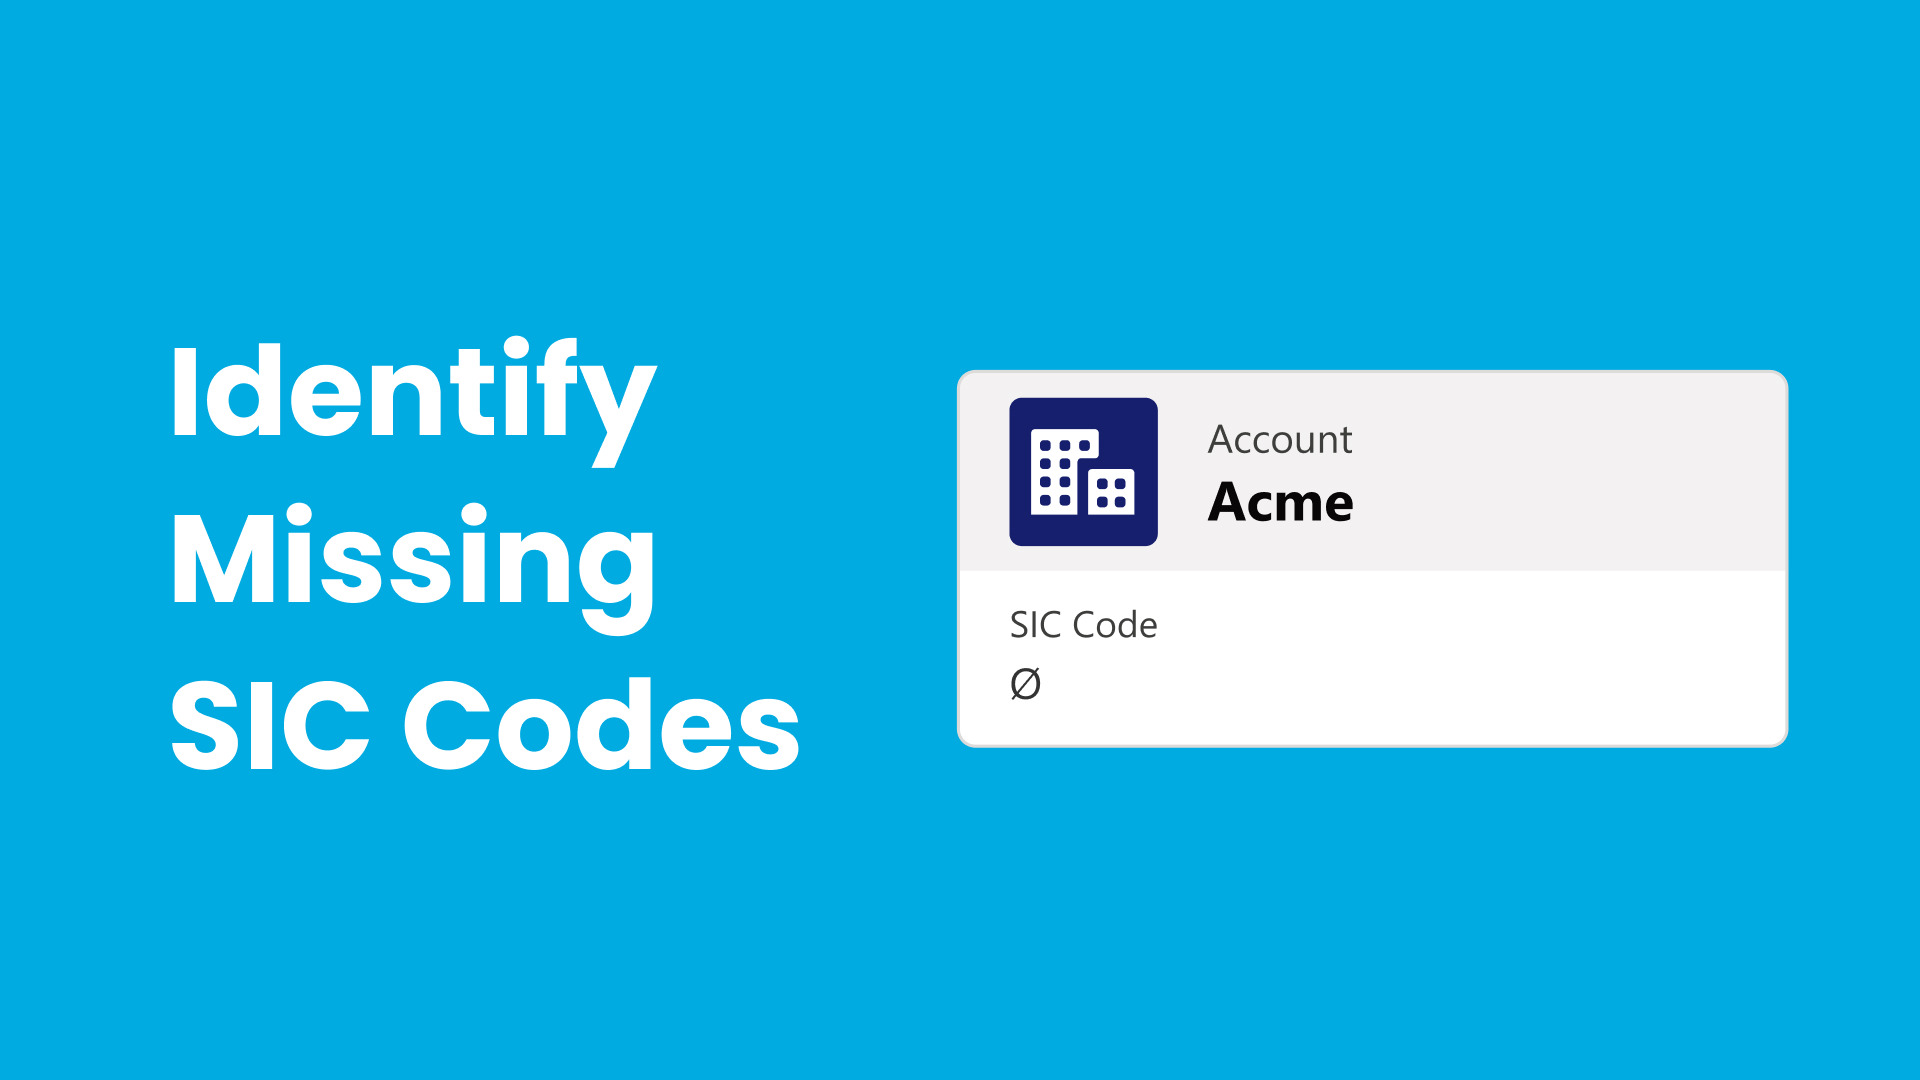 This Delpha use case is designed for detecting missing SIC codes inside Salesforce Accounts and can produce the correct code after engaging with the user.